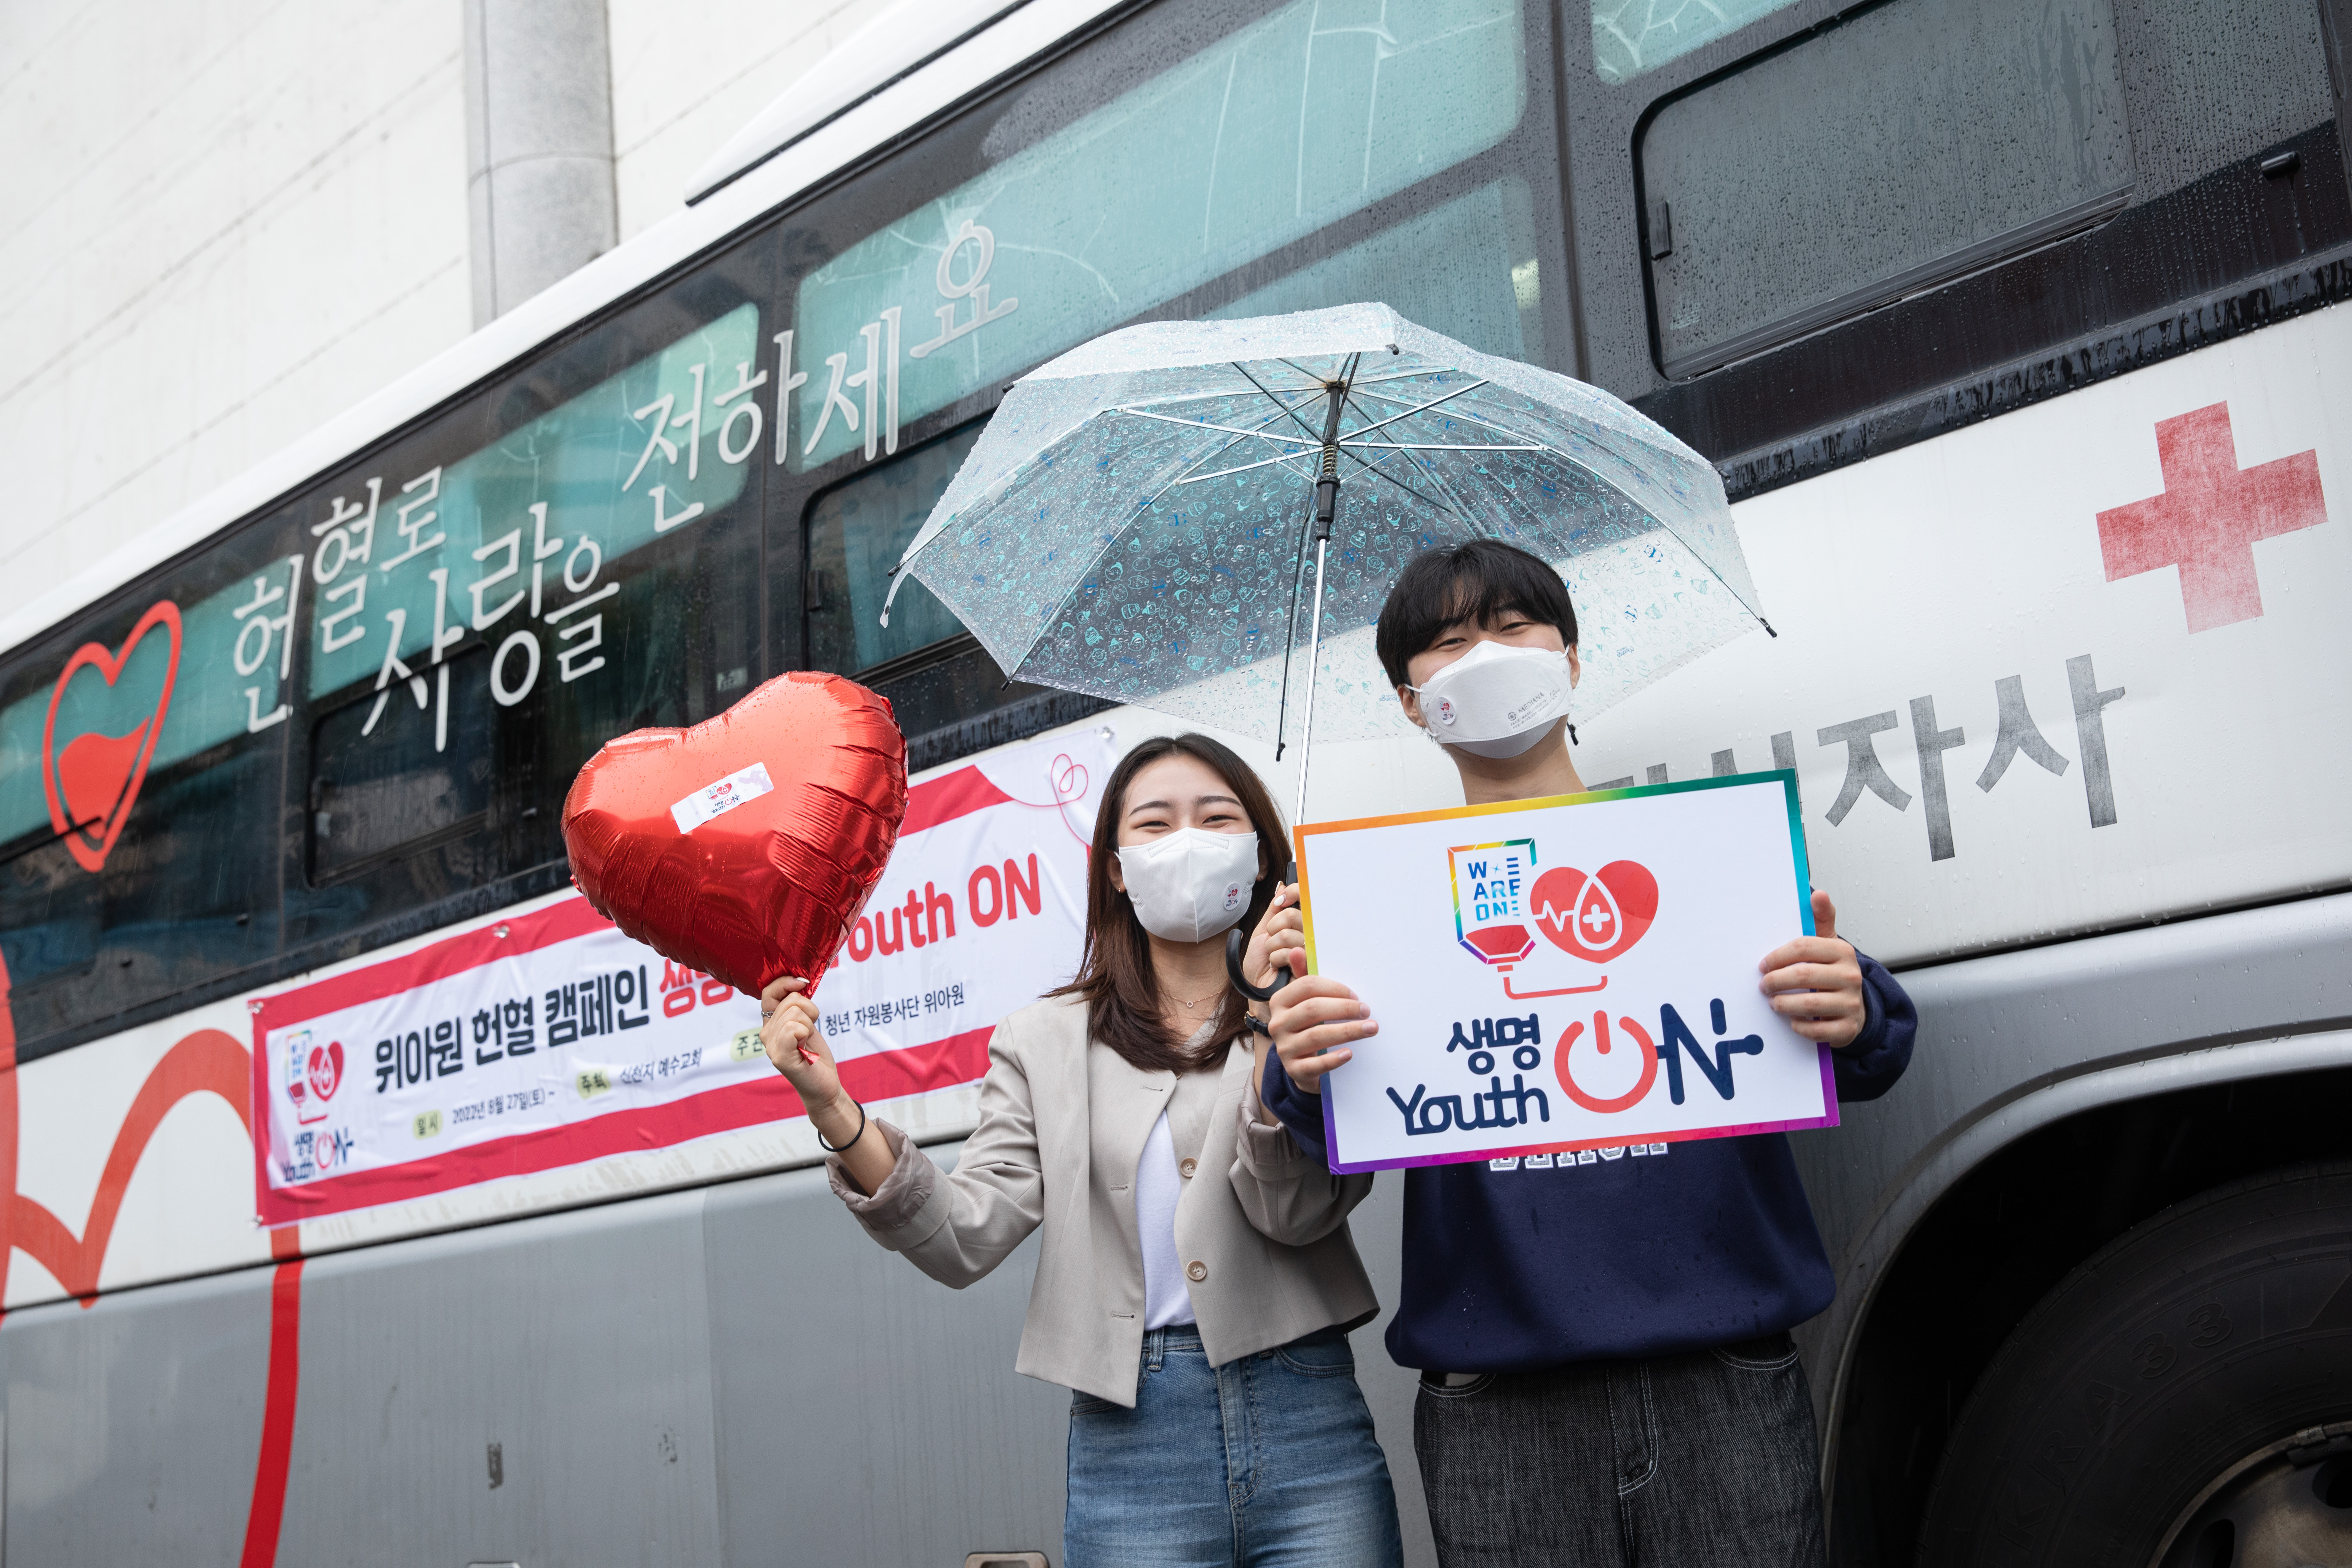 Shincheonji Youth Volunteers We Are One donate blood